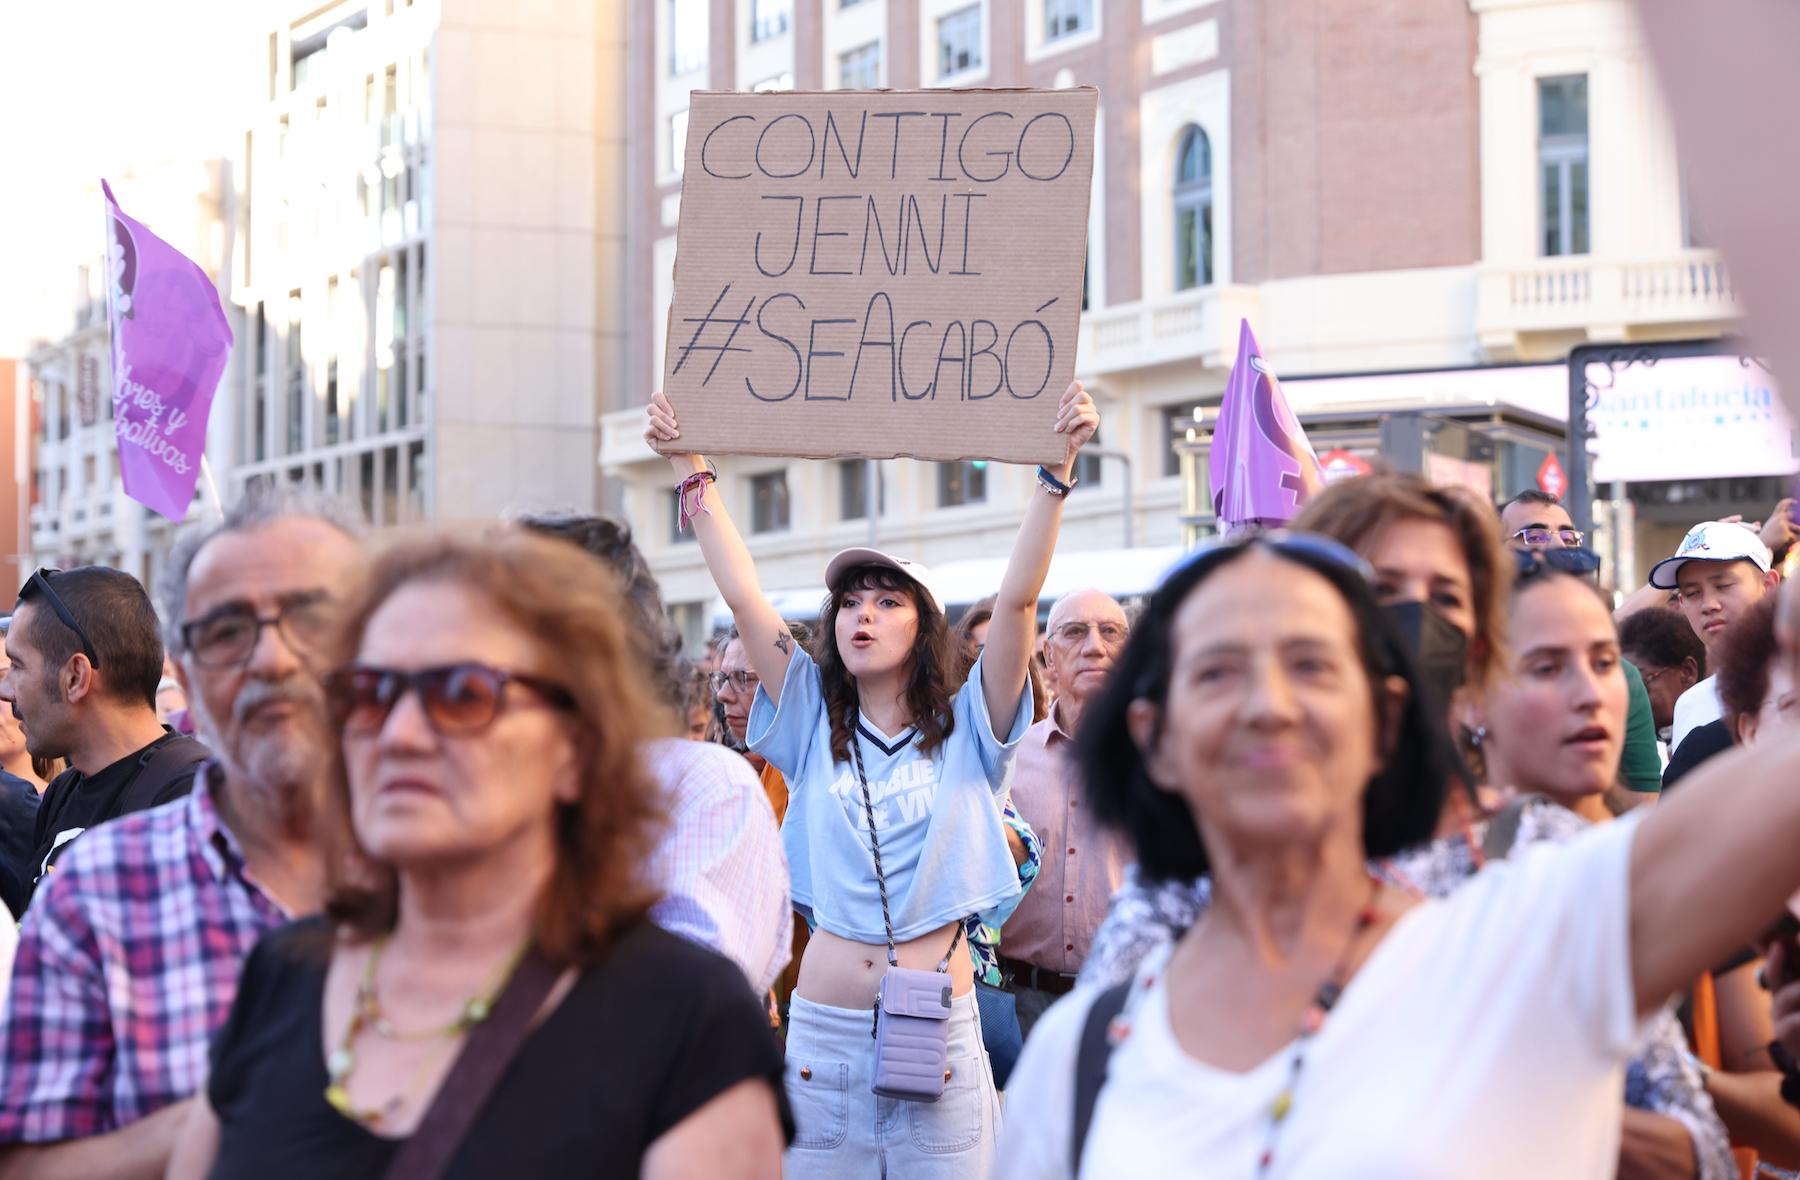 Women In Spain Are Protesting For The Football President To Resign After His Unconsensual Kiss